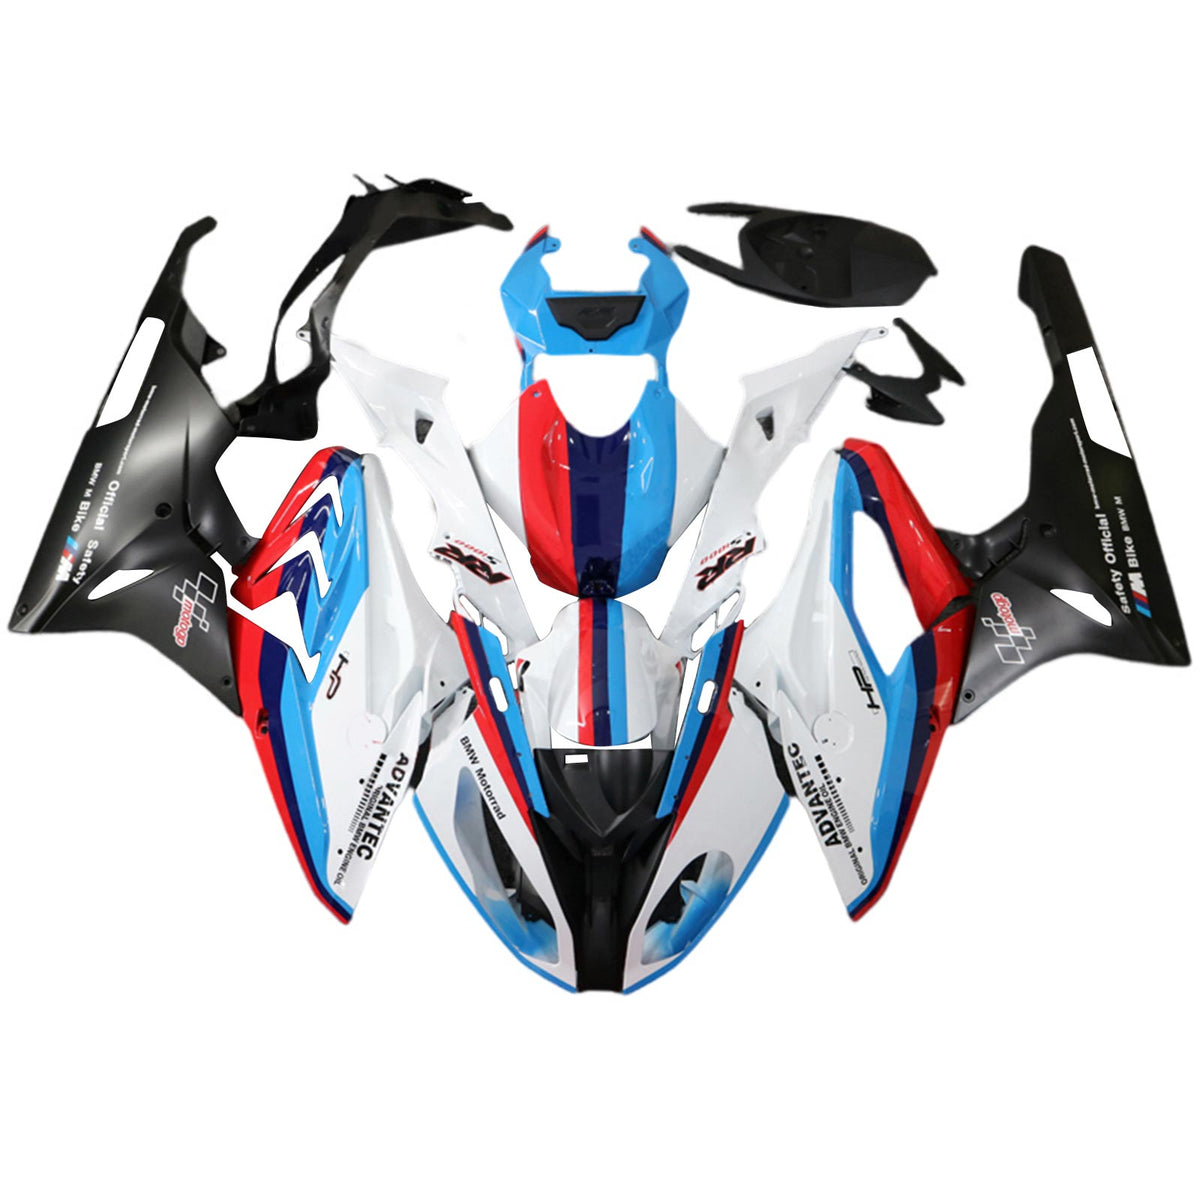 Amotopart Kit carena BMW S1000RR 2015-2016 Blue&amp;Red Style6